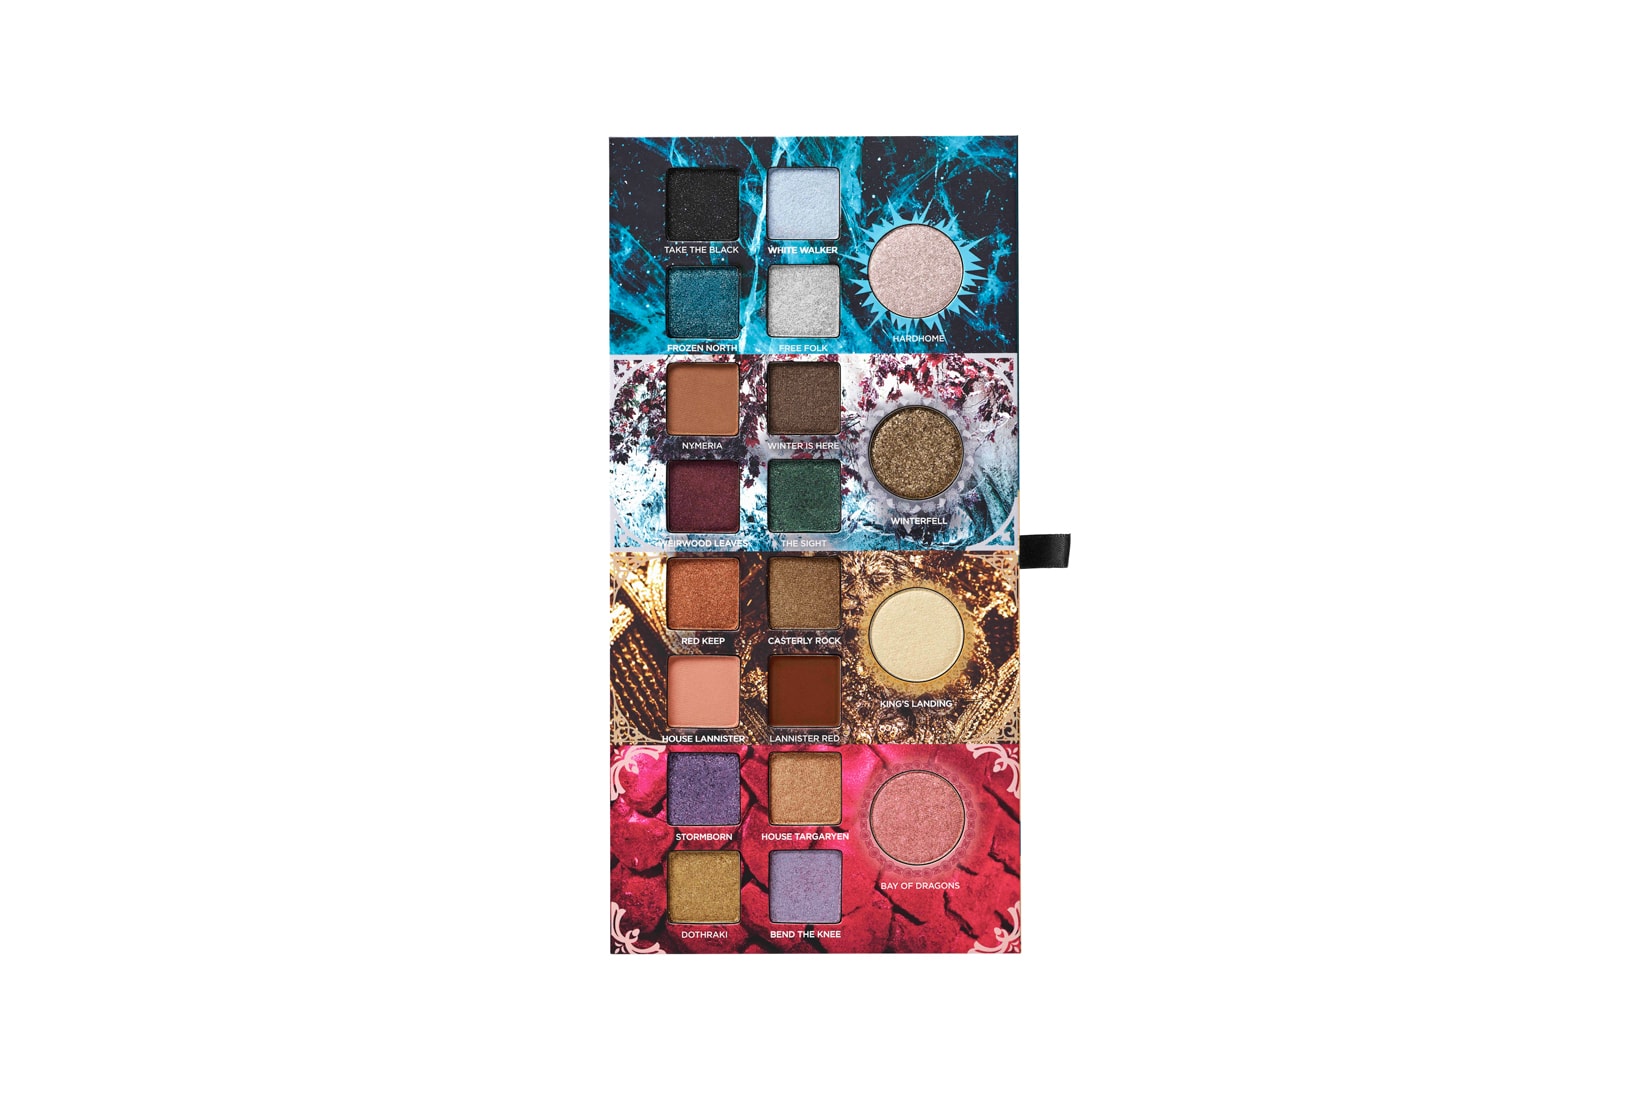 Game of Thrones x Urban Decay Makeup Collection Eyeshadow Palette